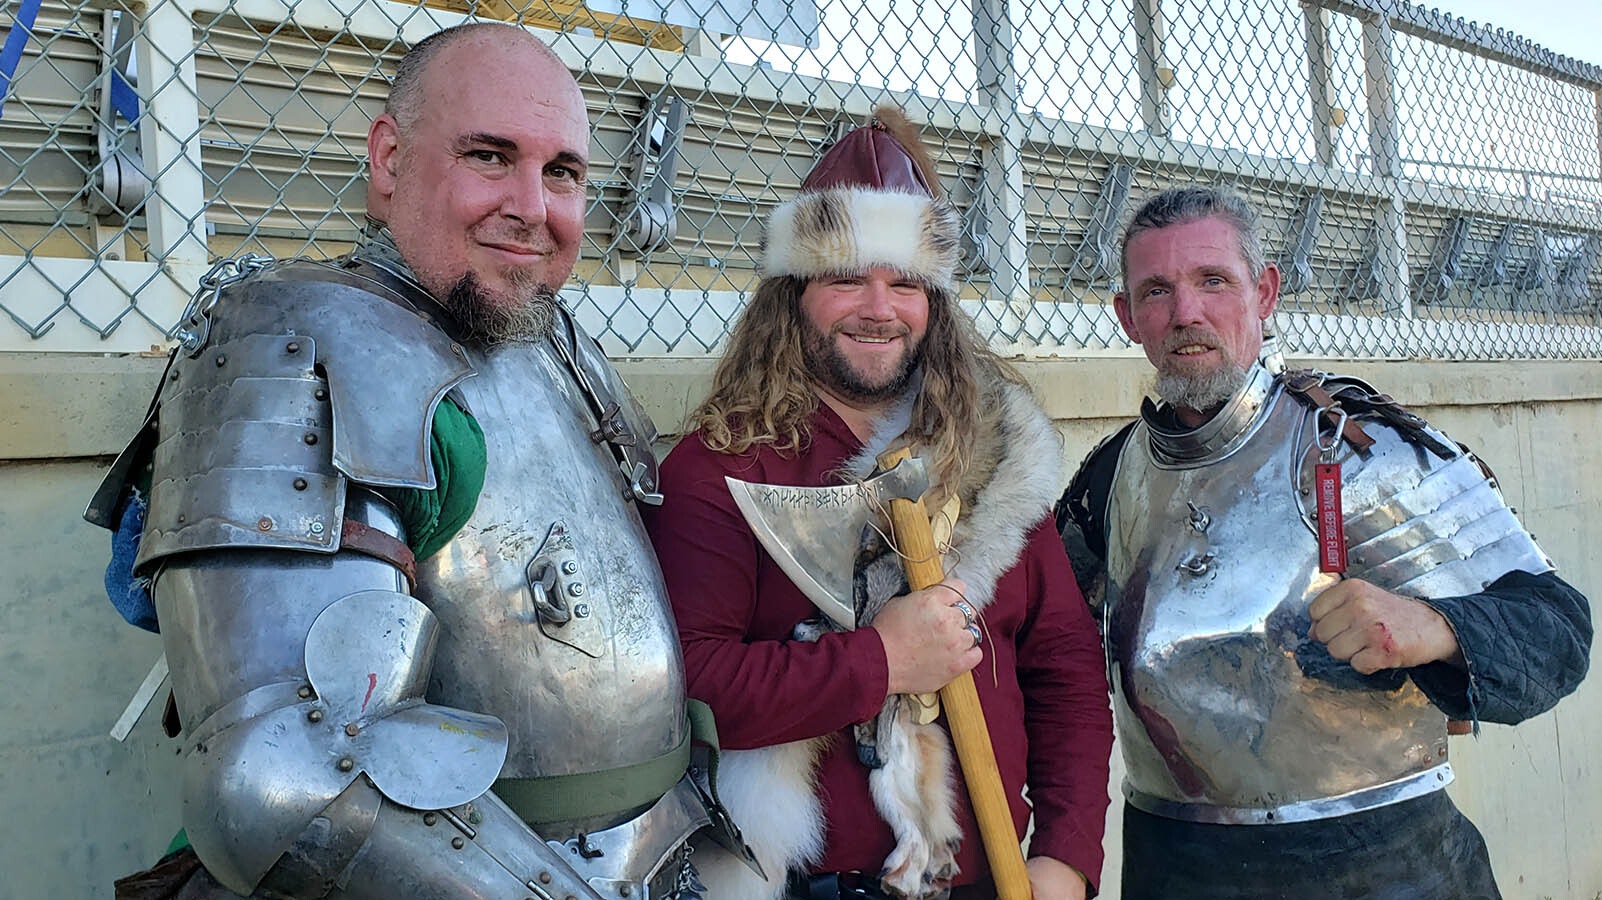 TJ Duquette, left, with Knights of Valor Caol La Darna dressed as an Anglo Saxon, and Viking Larry Dupler — all Knights of Valor members — pose for a photo.